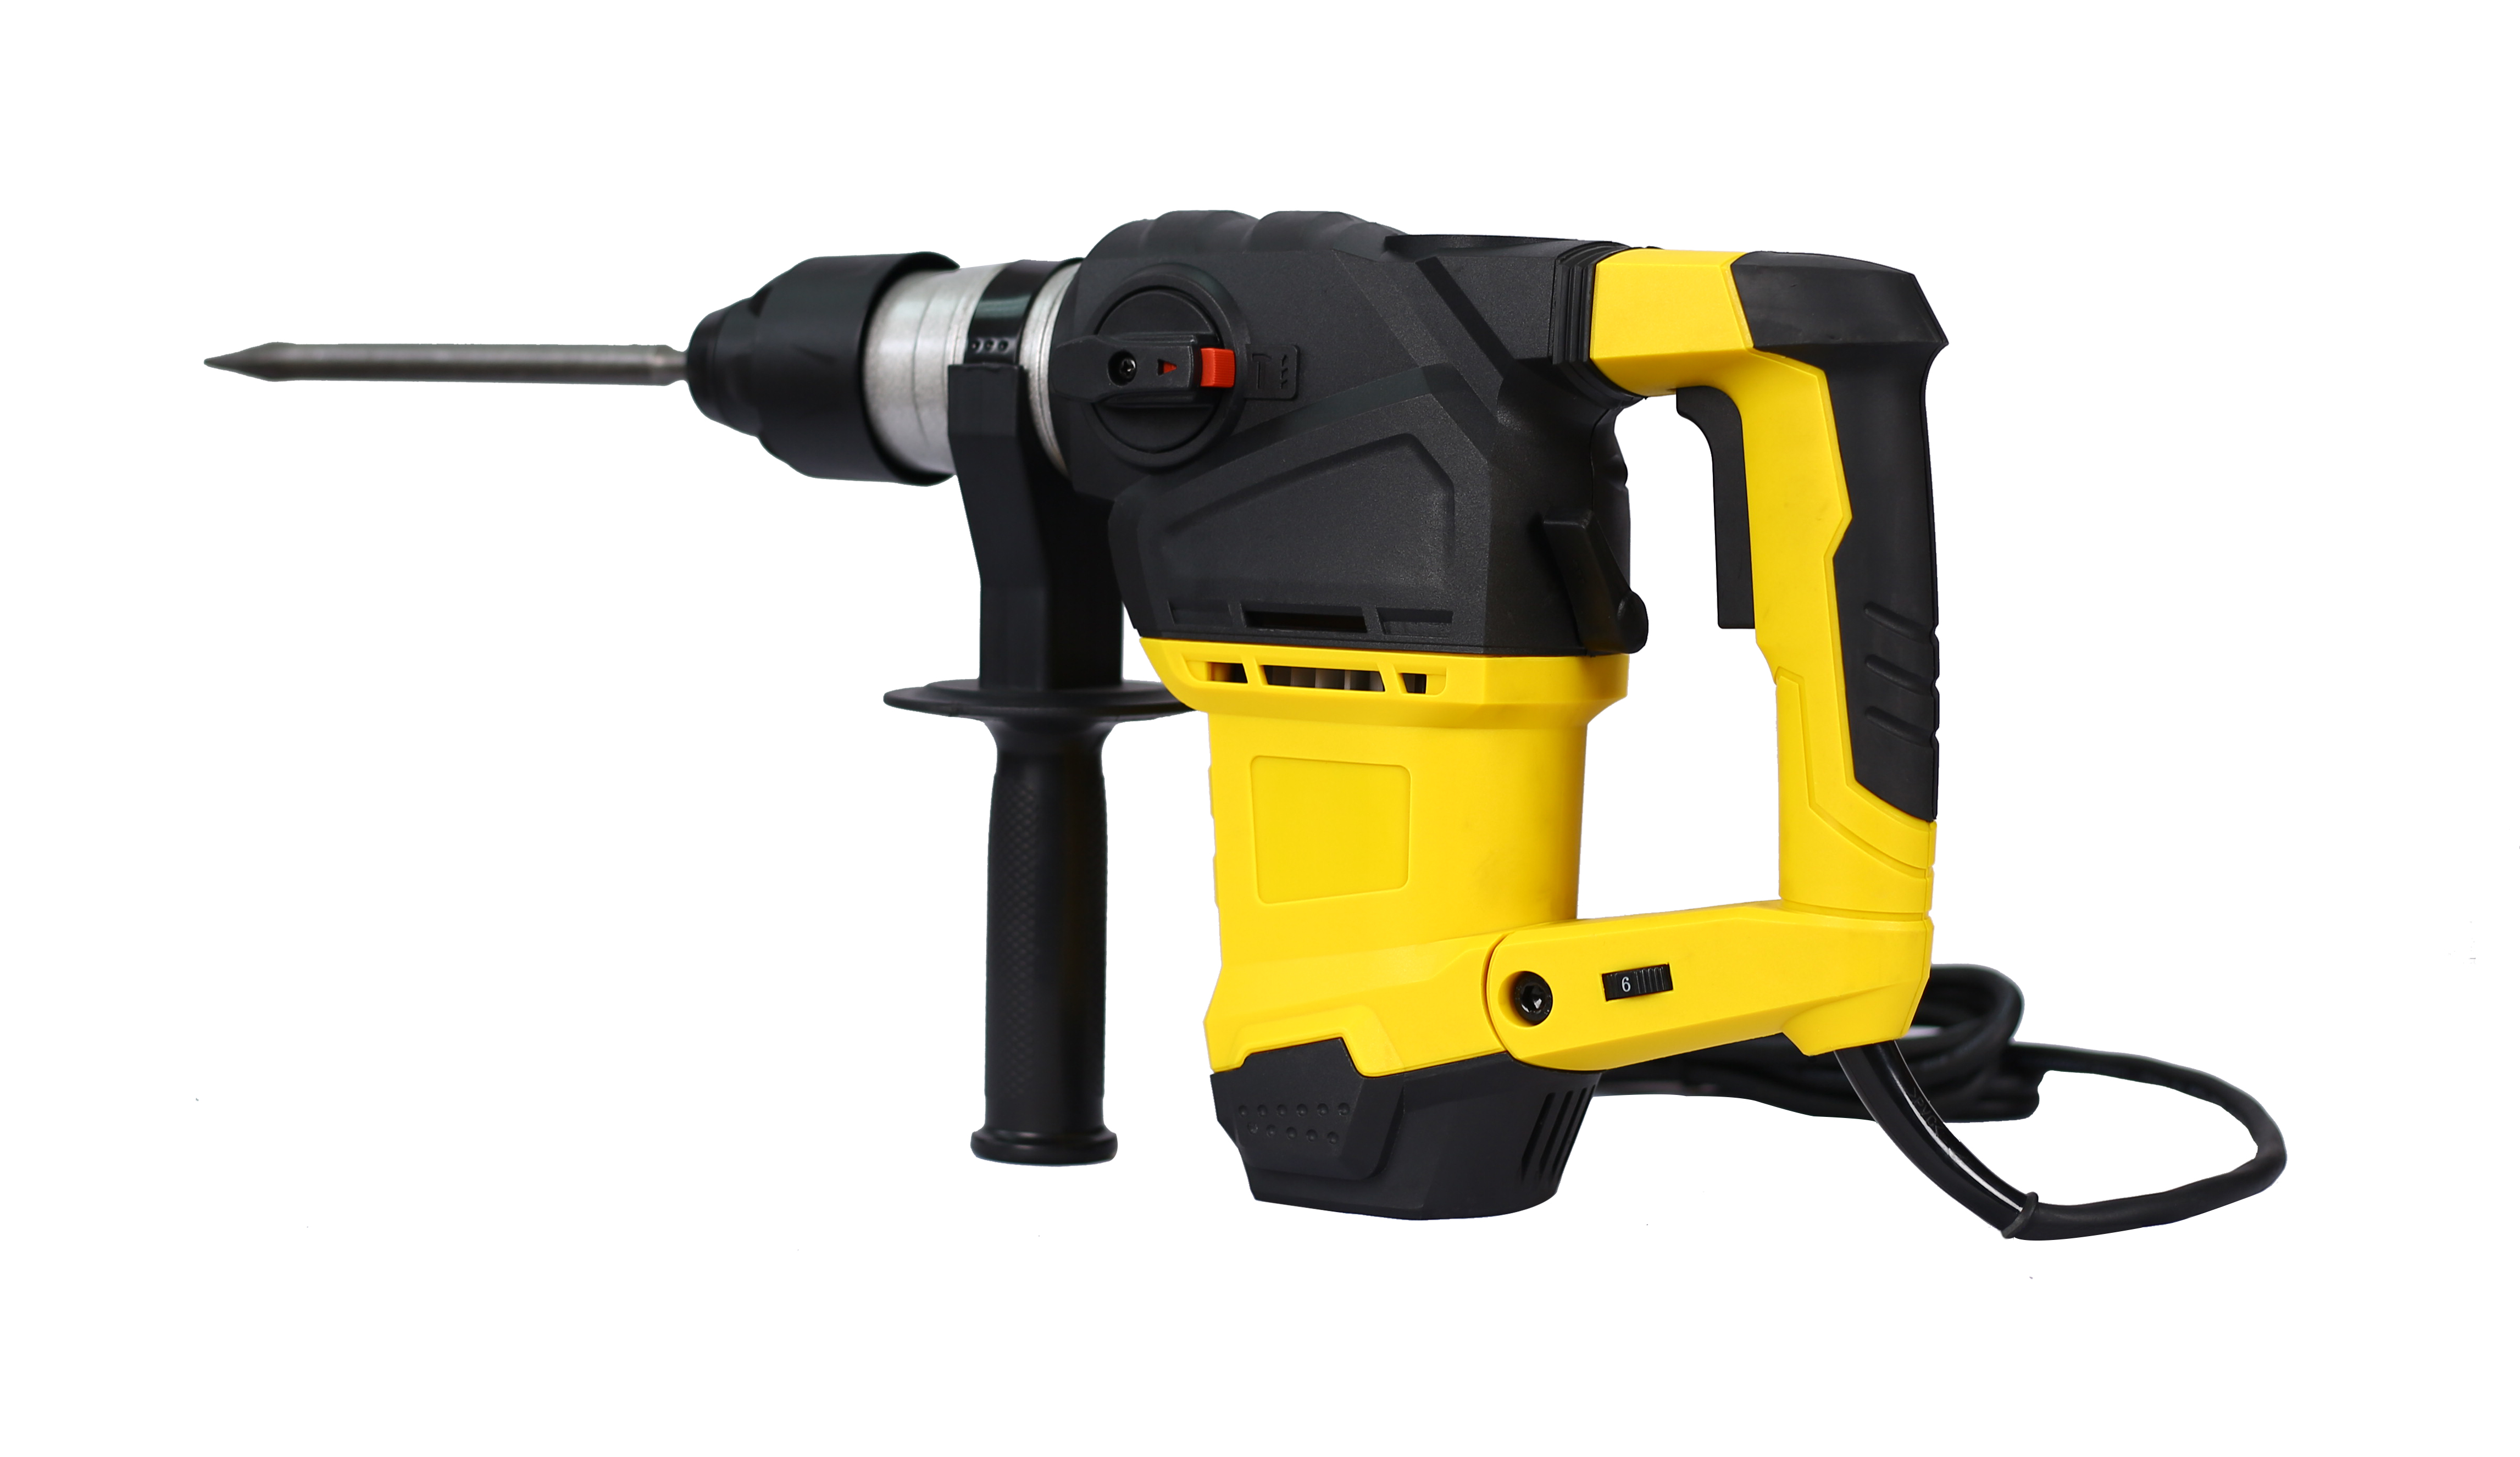 Clearance! 1-1/4 Inch SDS-Plus 13 Amp Rotary Hammer Drill Heavy Duty, Safety  Clutch Functions with Vibration Control,Including Grease, Flat Chisels,  Point Chisels and Drill Bits